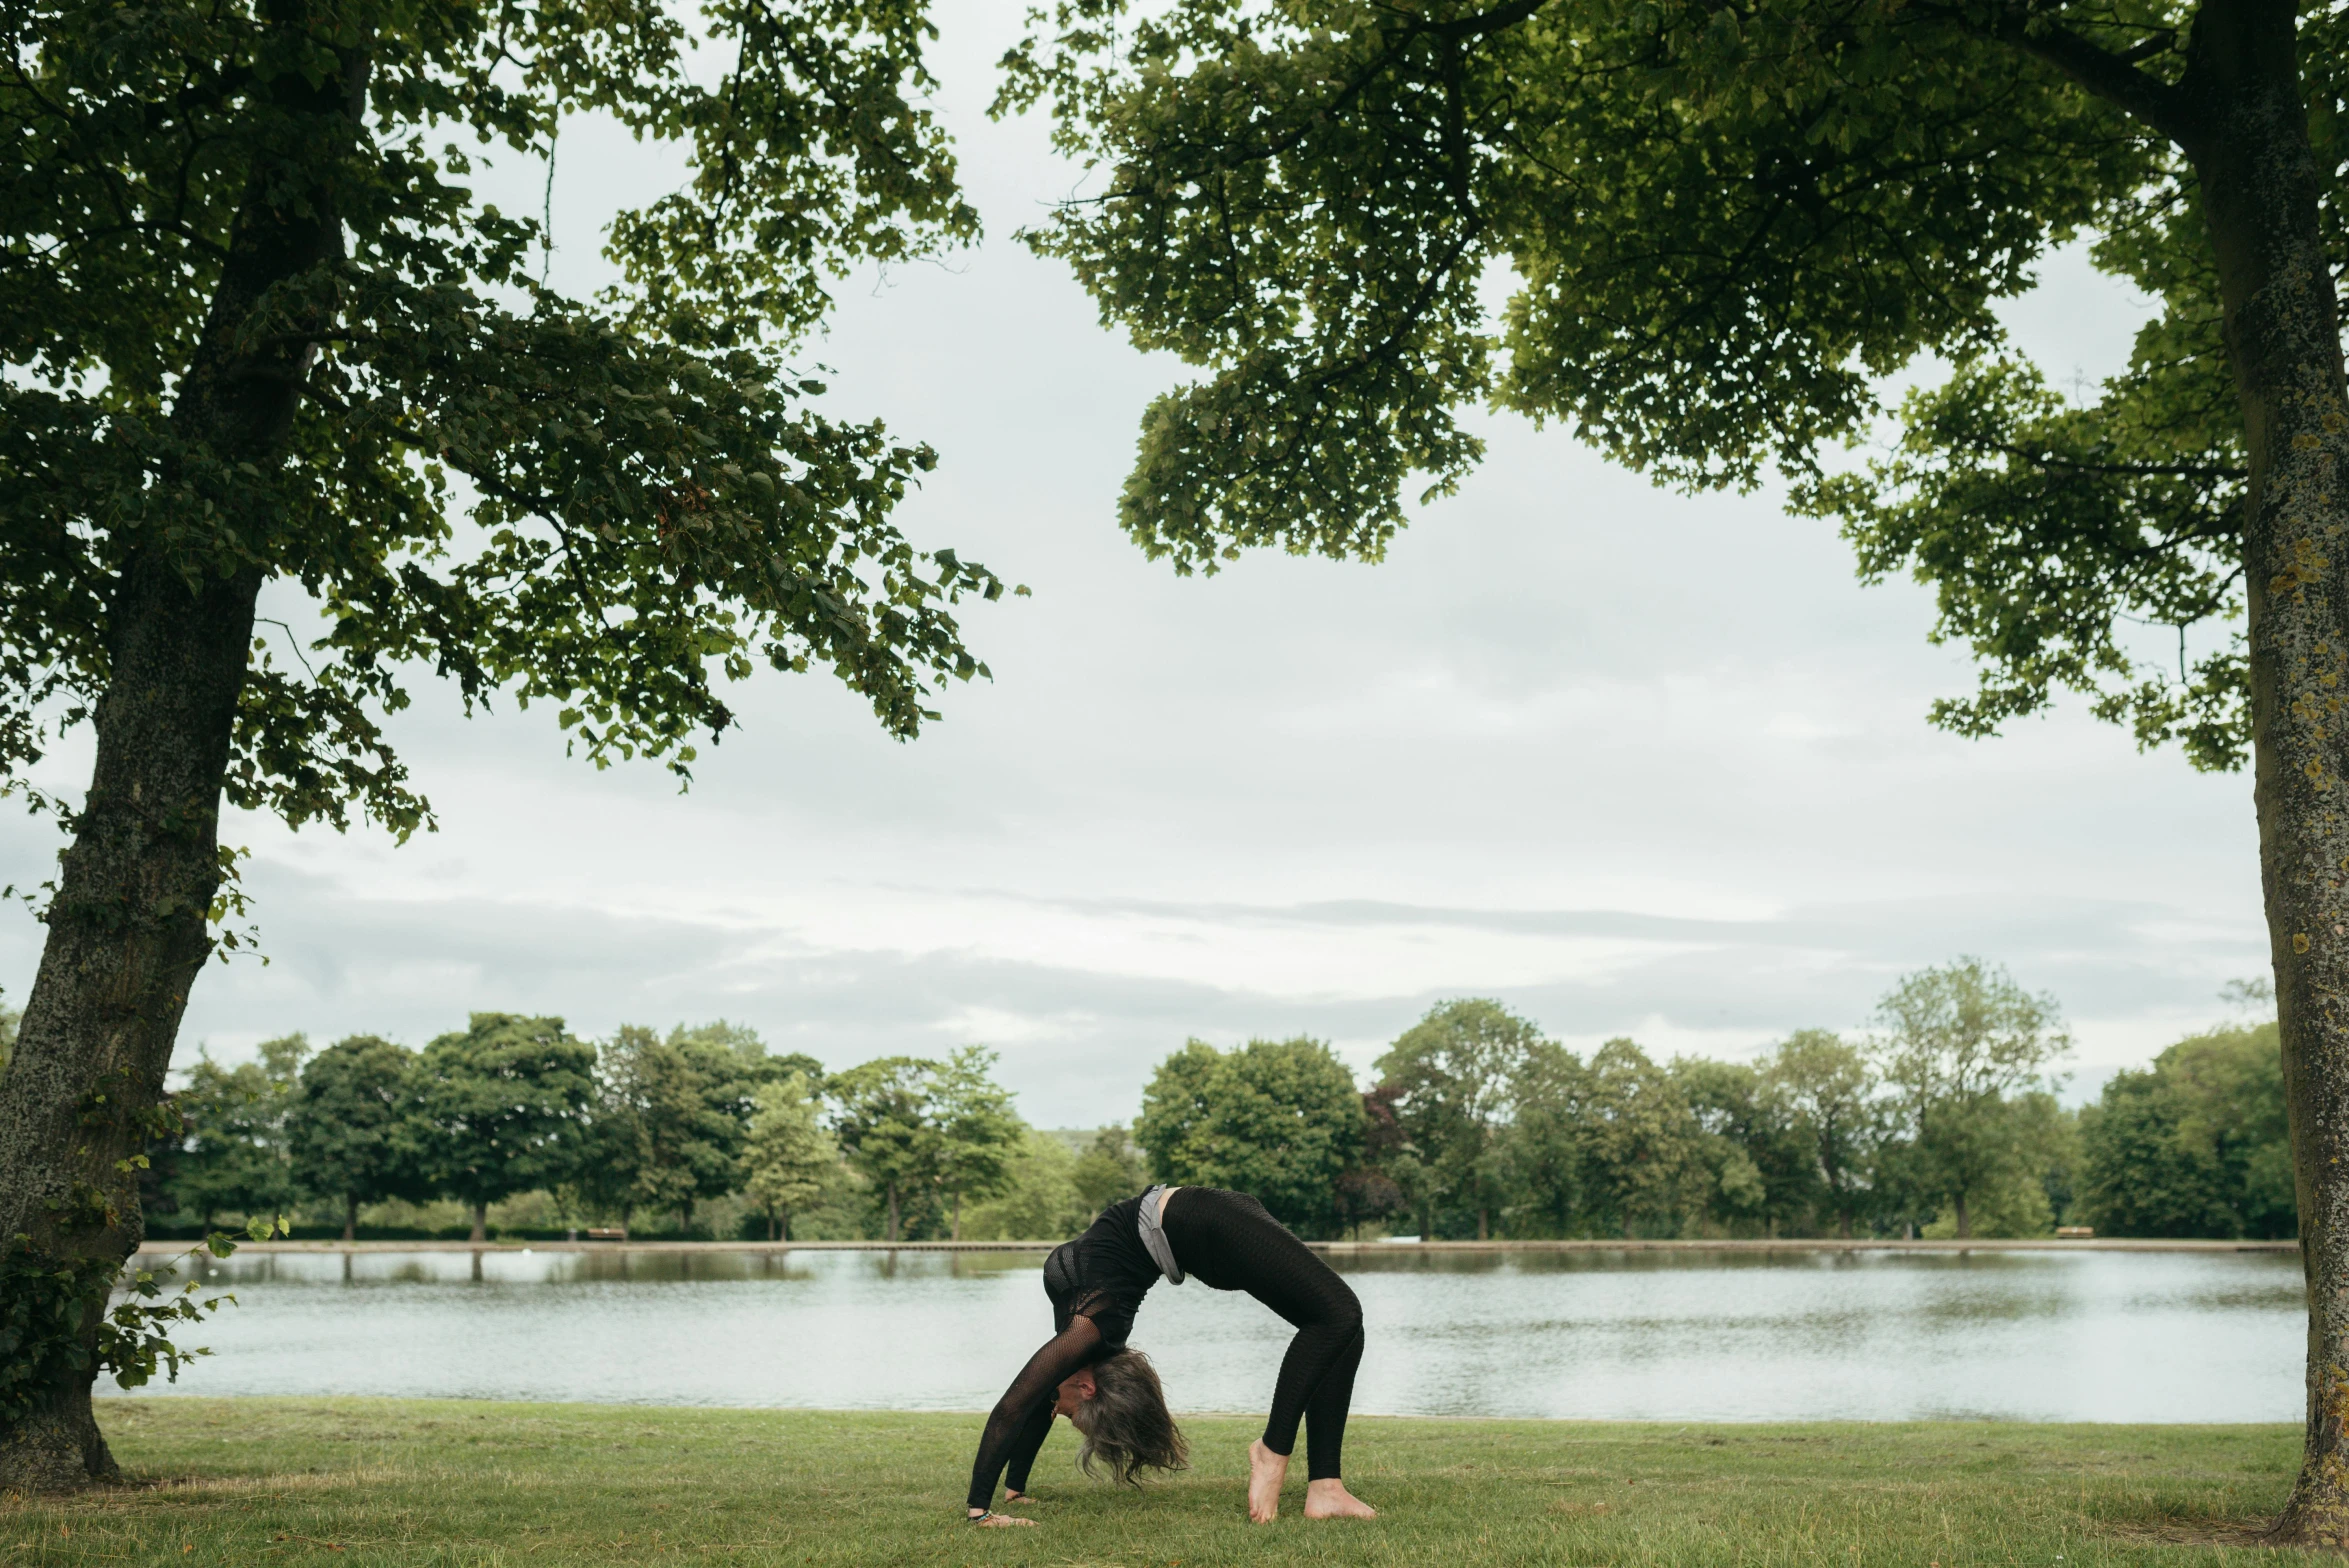 a man doing a handstand in front of a lake, by Rachel Reckitt, land art, an archway, stretching her legs on the grass, owen gent, near a lake